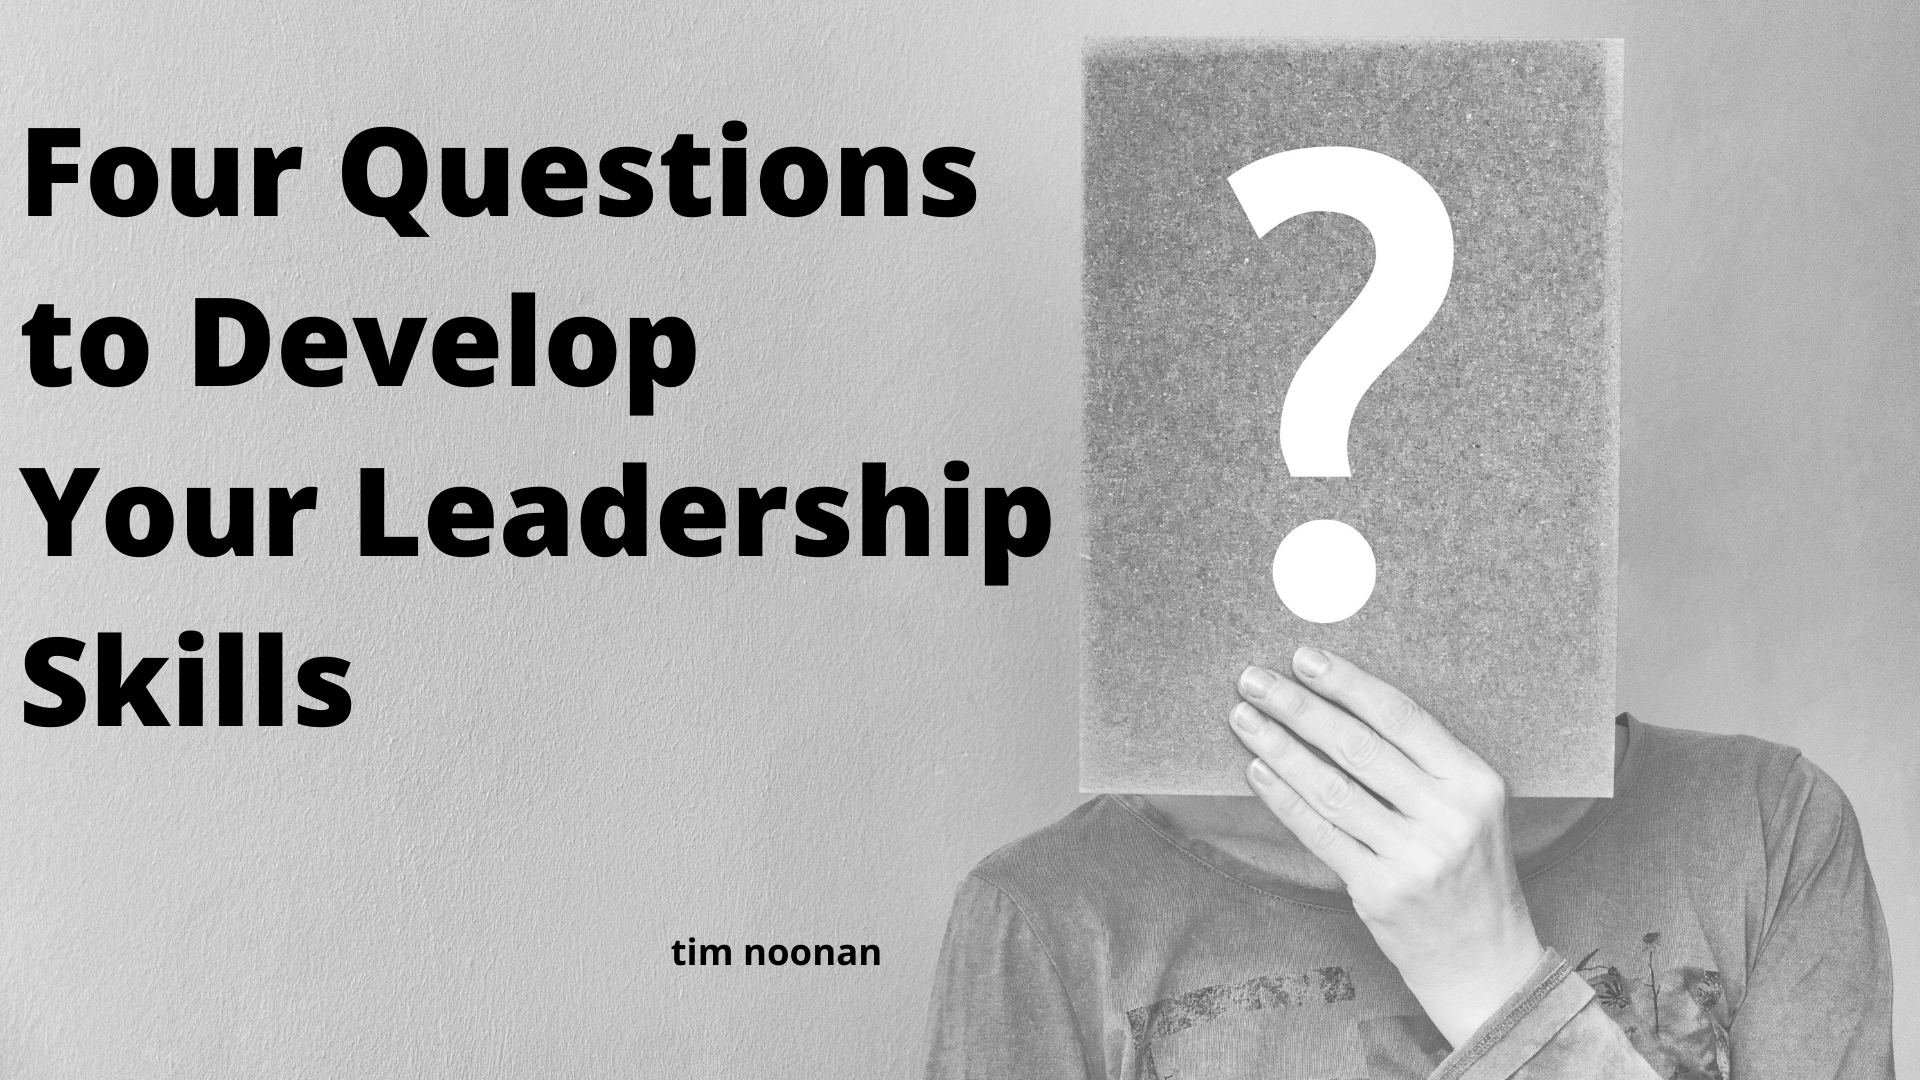 Four Questions to Develop Your Leadership Skills by Tim Noonan